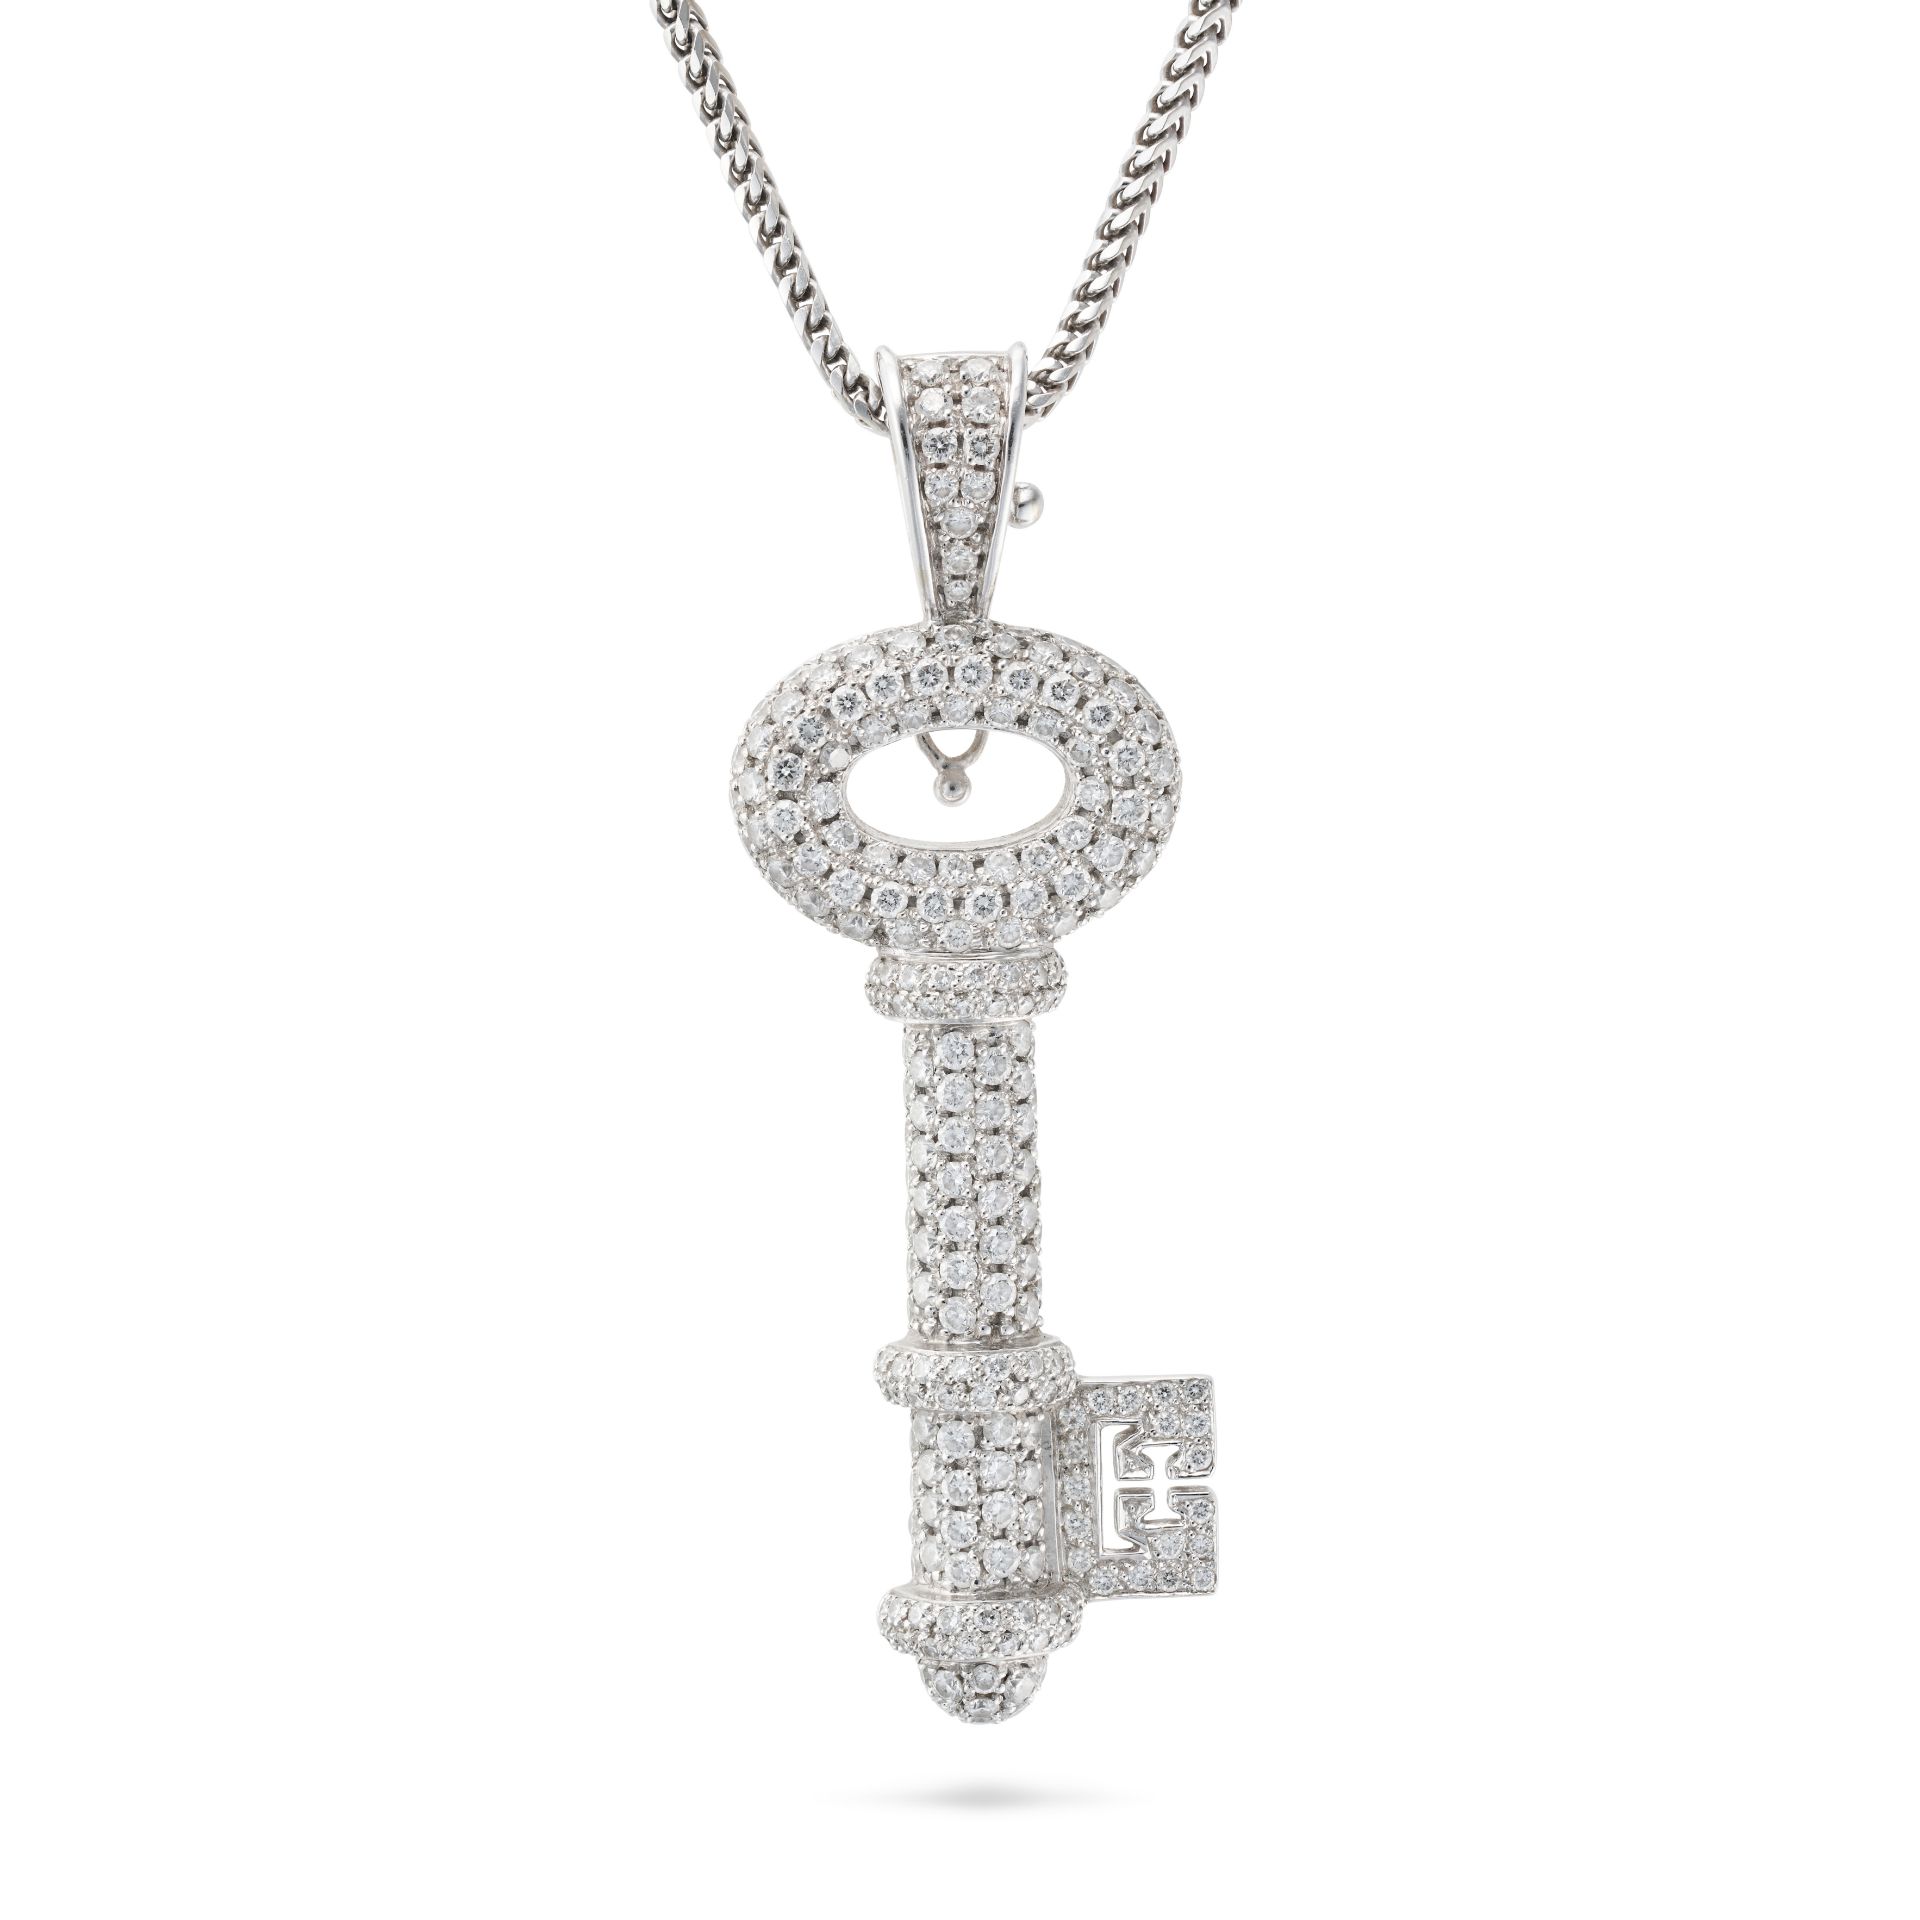 THEO FENNELL, A DIAMOND KEY PENDANT NECKLACE in 18ct white gold, the pendant designed as a key pa... - Image 2 of 2